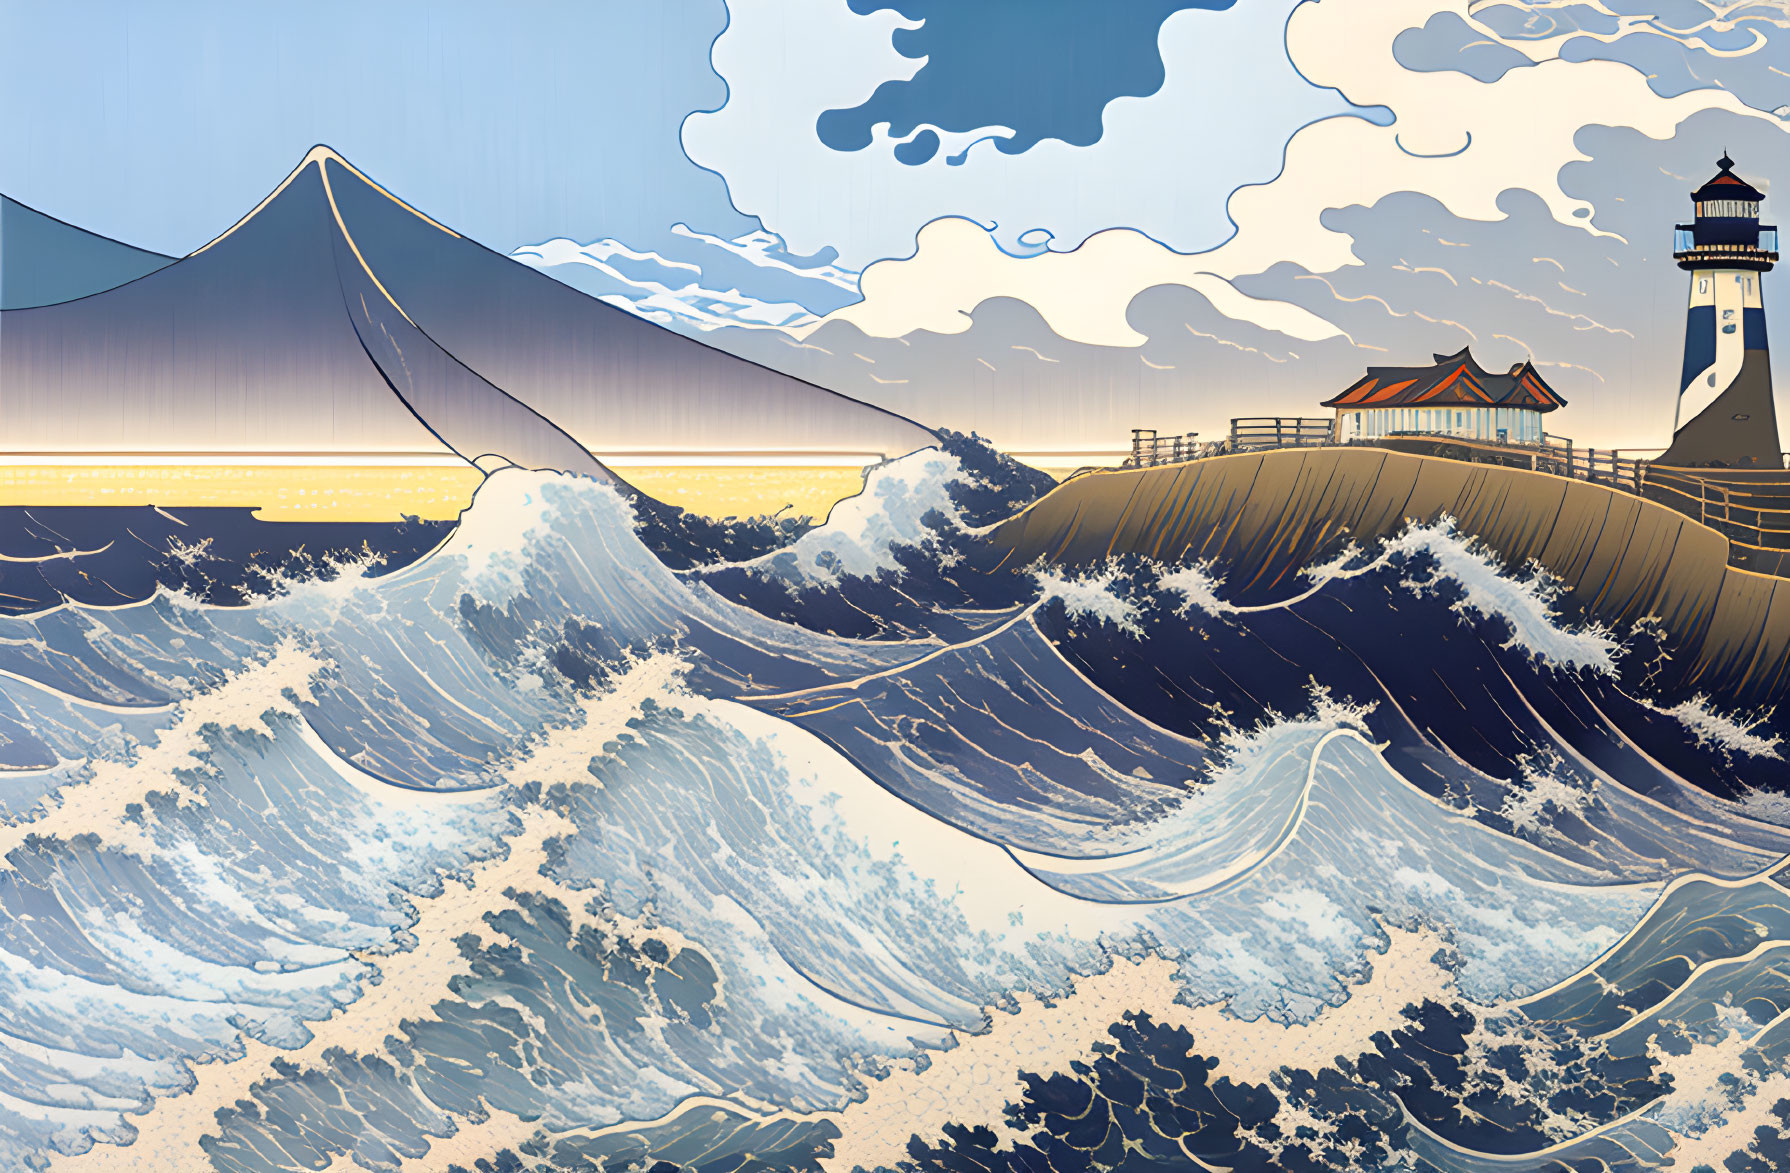 Illustration of stylized waves with lighthouse, pier, and mountain under cloudy sky